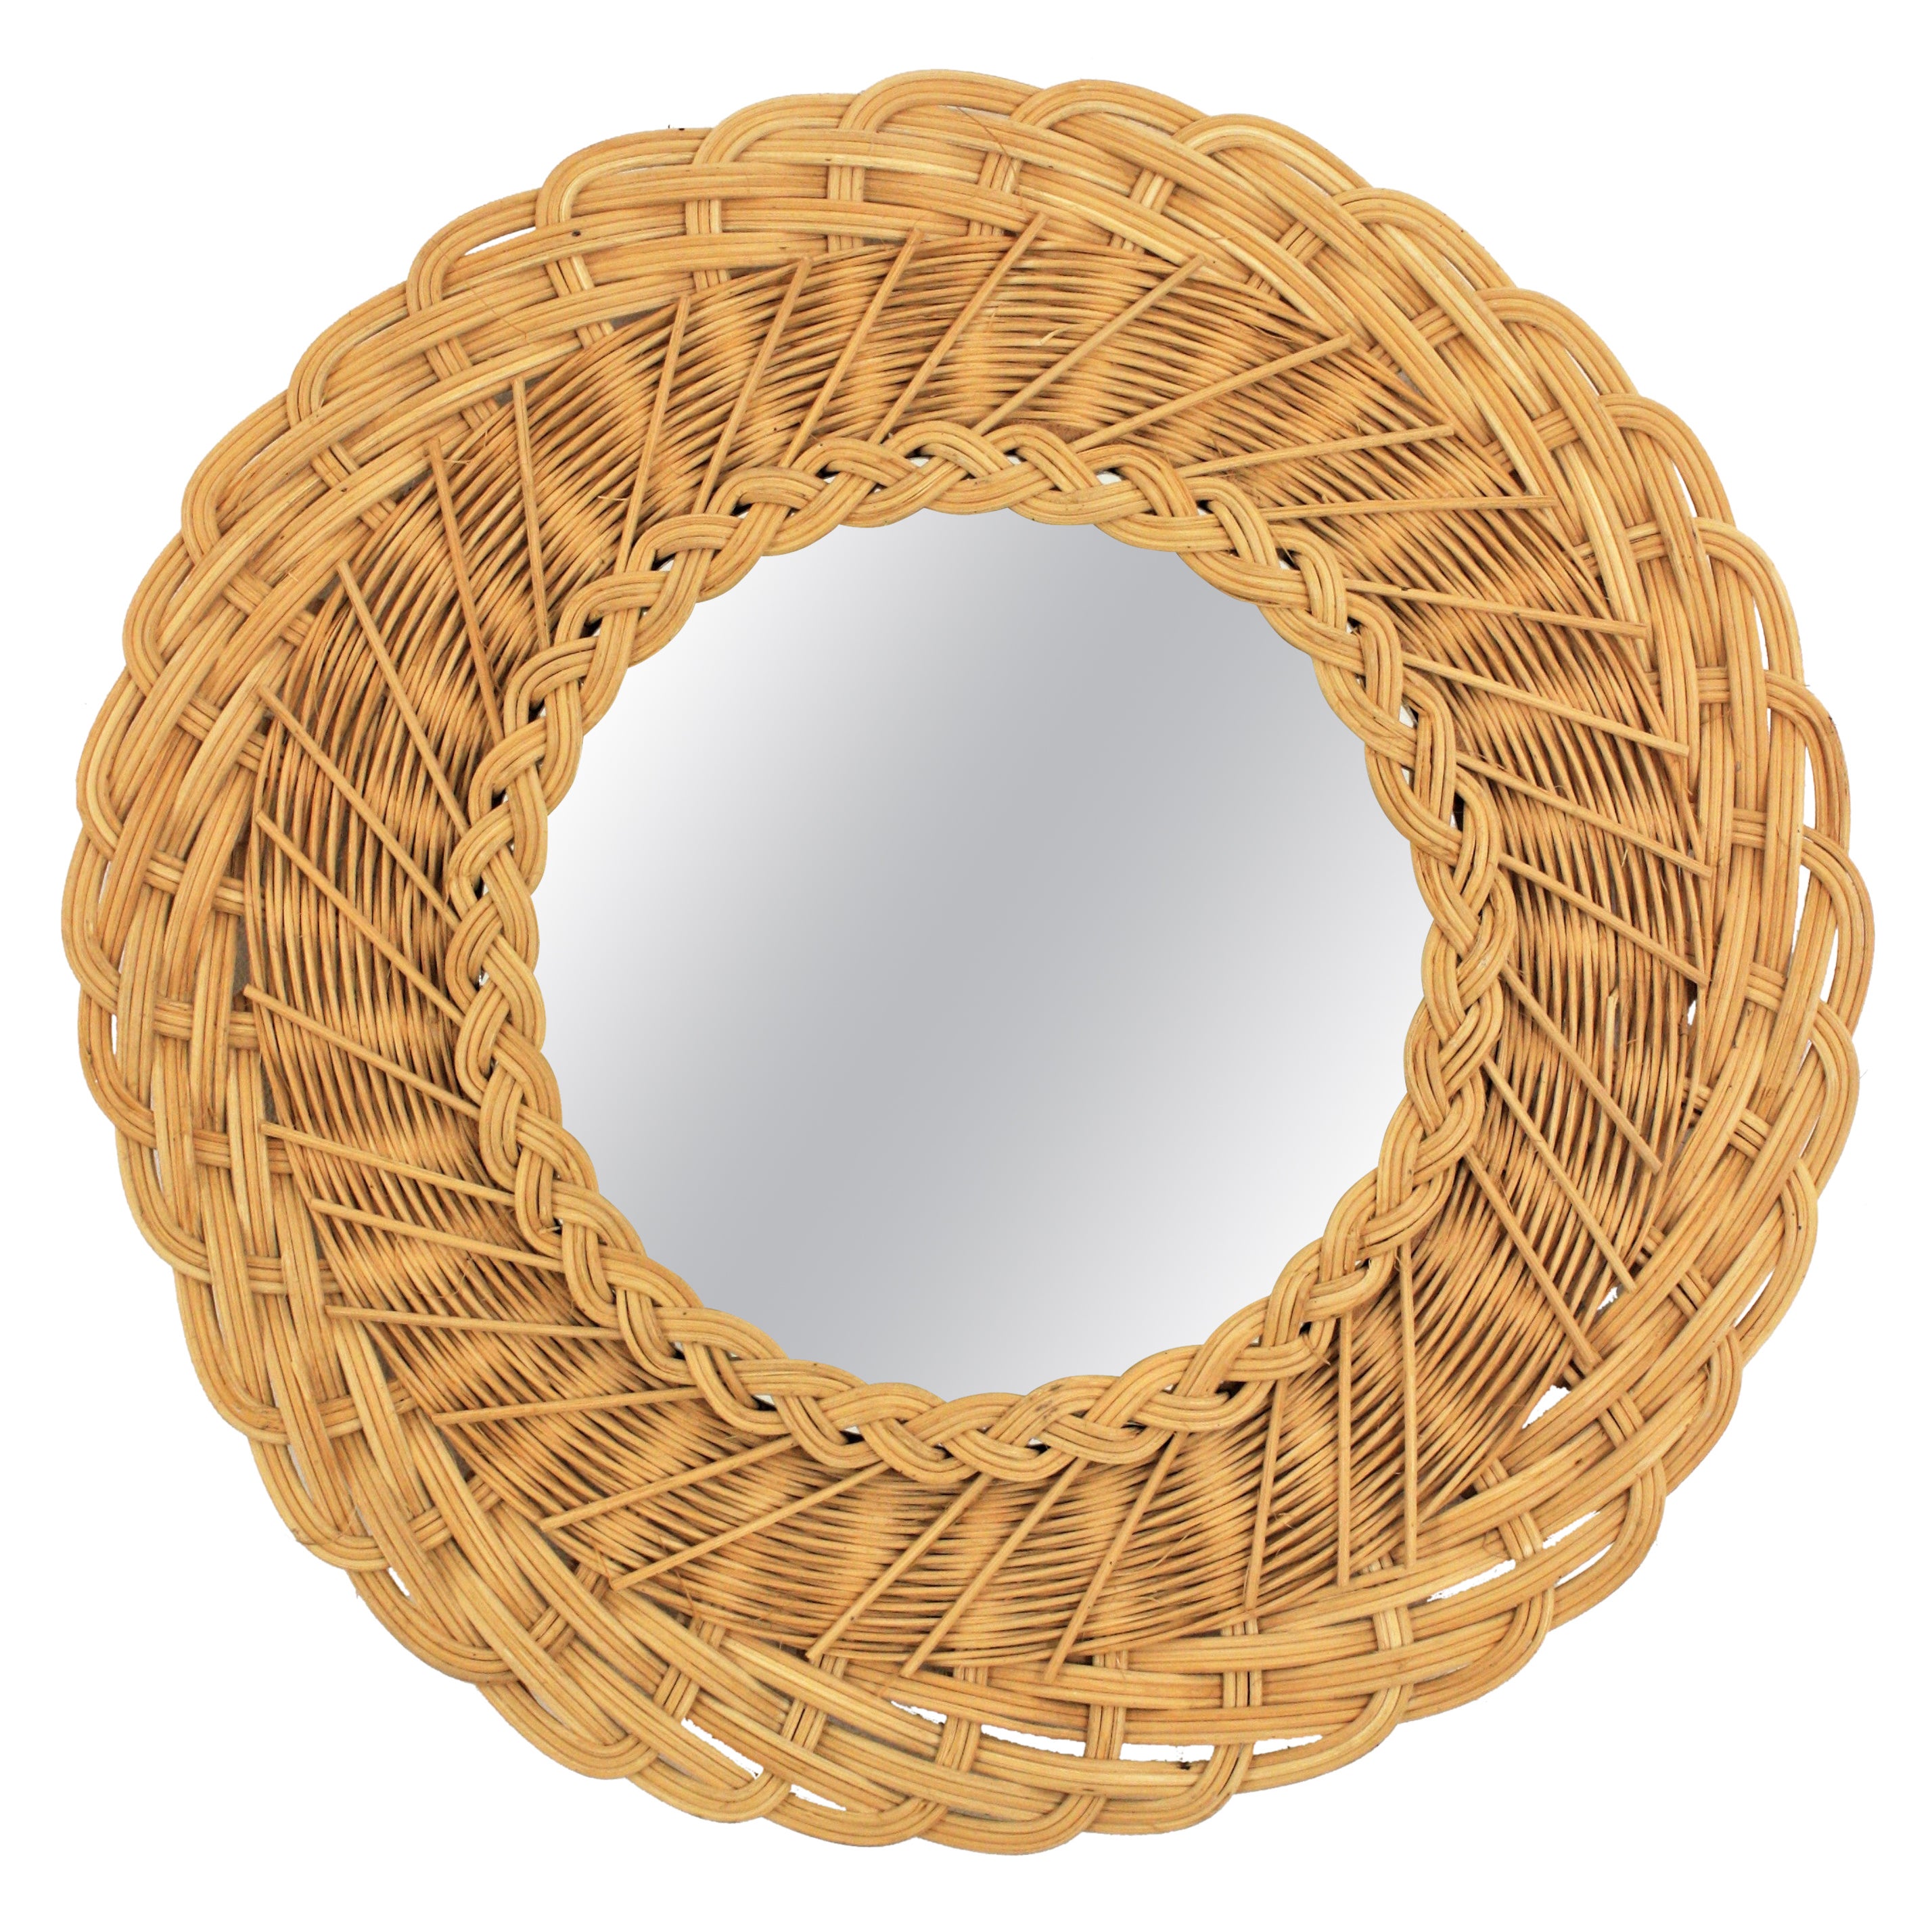 Rattan Wicker Round Mirror with Hand-Woven Frame, France, 1960s